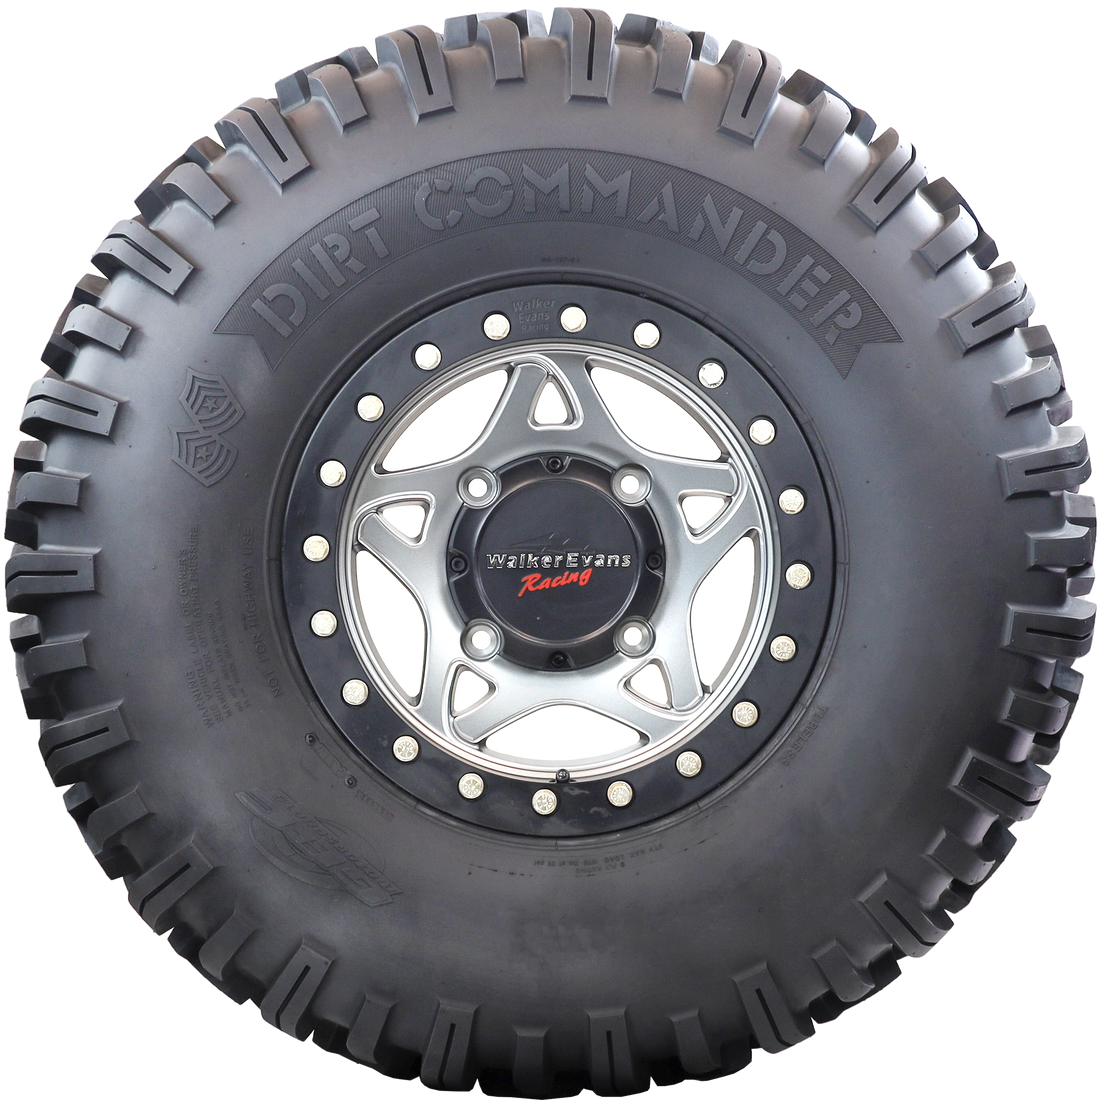 Close-up view of the Dirt Commander tire sidewall, emphasizing its tough sidewall lugs and sturdy construction, purpose-built for SXS/UTV off-road vehicles